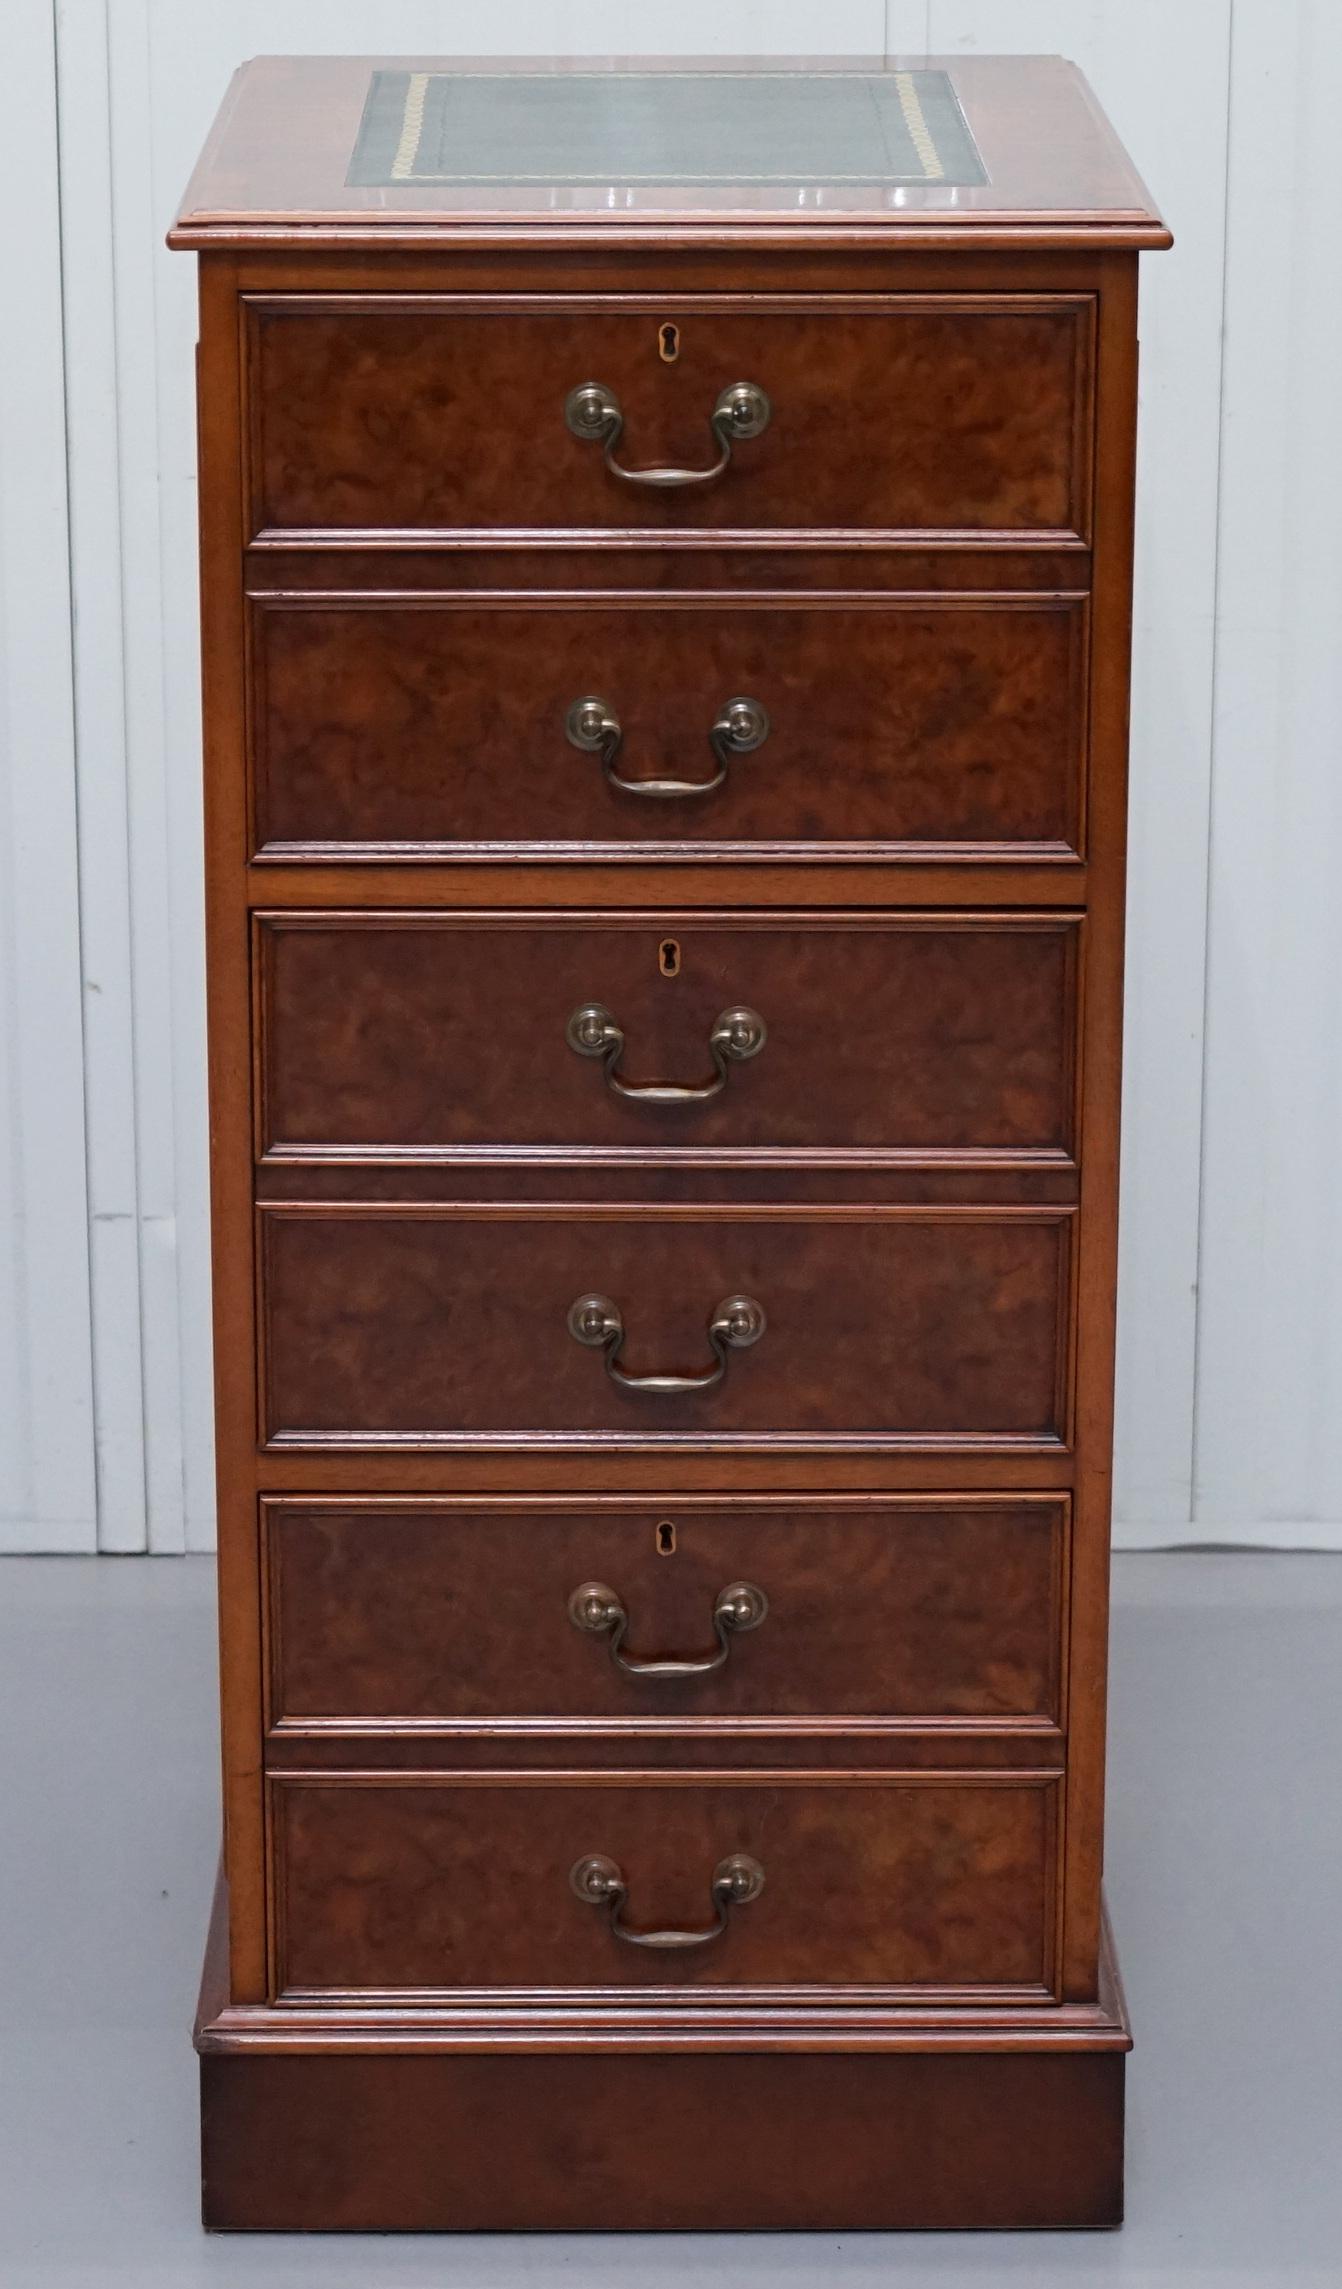 We are delighted to offer for sale this lovely large Burr Walnut with green leather gold tooled writing surface three drawer filing cabinet 

The green leather writing surface is gold tooled and it has a nice vintage patina to it as does the burr